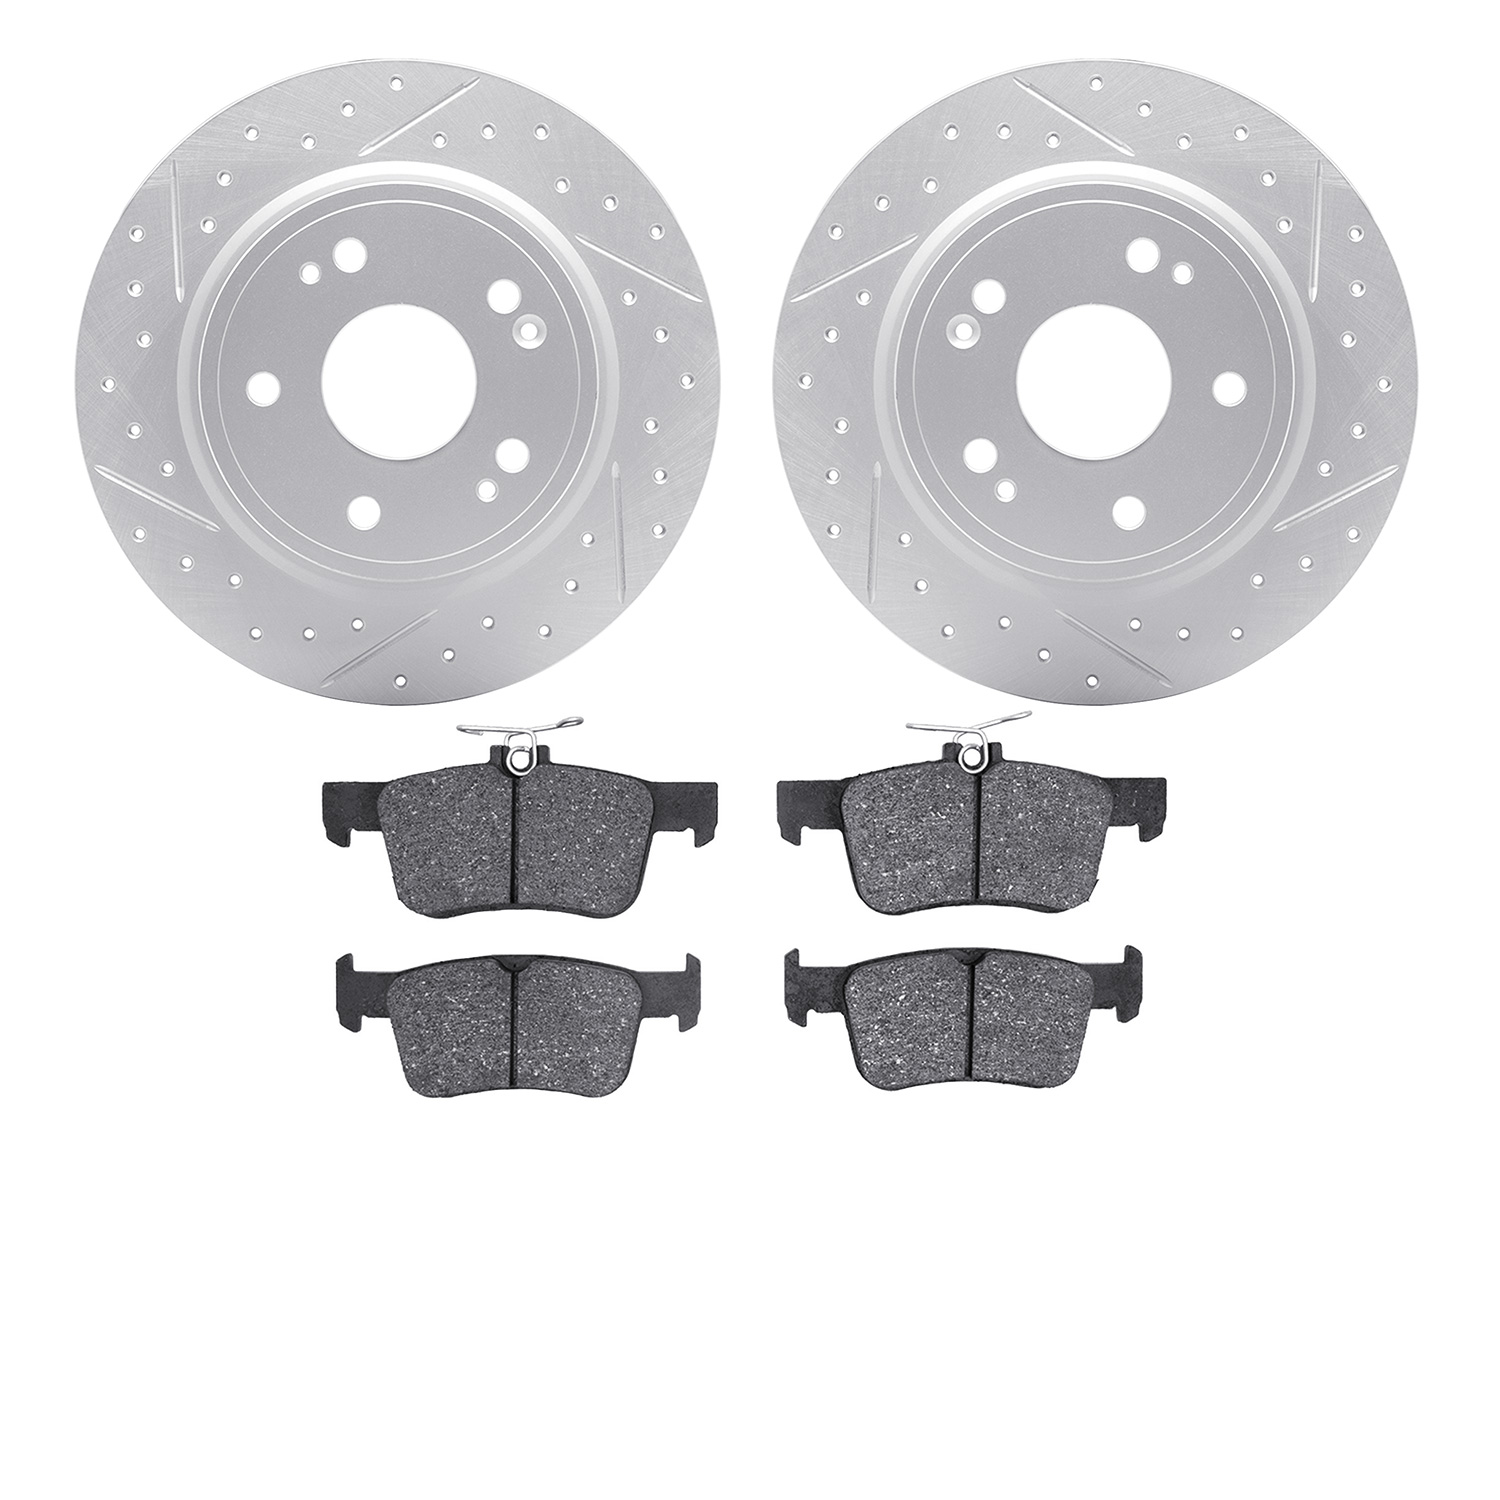 2502-59119 Geoperformance Drilled/Slotted Rotors w/5000 Advanced Brake Pads Kit, 2018-2020 Acura/Honda, Position: Rear